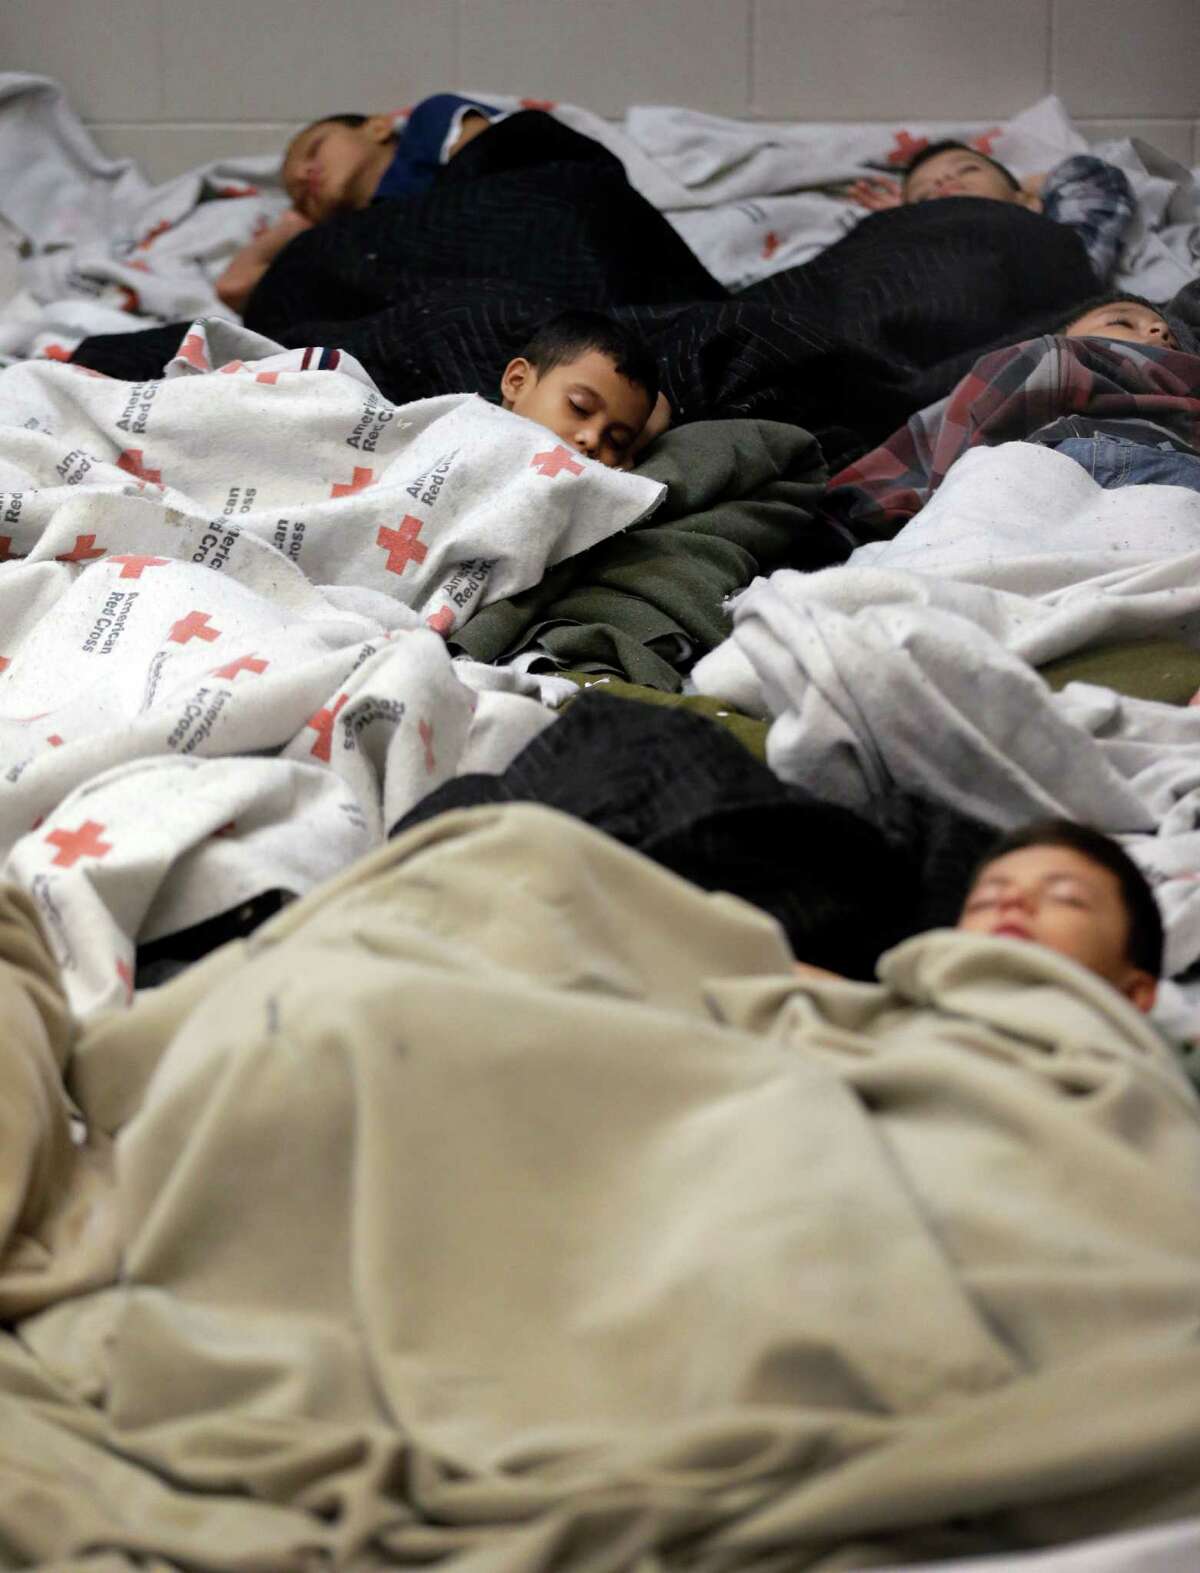 BROWNSVILLE, TX - JUNE 18: A detainees sleep in a holding cell at a U.S. Customs and Border Protection processing facility, on June 18, 2014, in Brownsville,Texas. Brownsville and Nogales, Ariz. have been central to processing the more than 47,000 unaccompanied children who have entered the country illegally since Oct. 1. (Photo by Eric Gay-Pool/Getty Images)